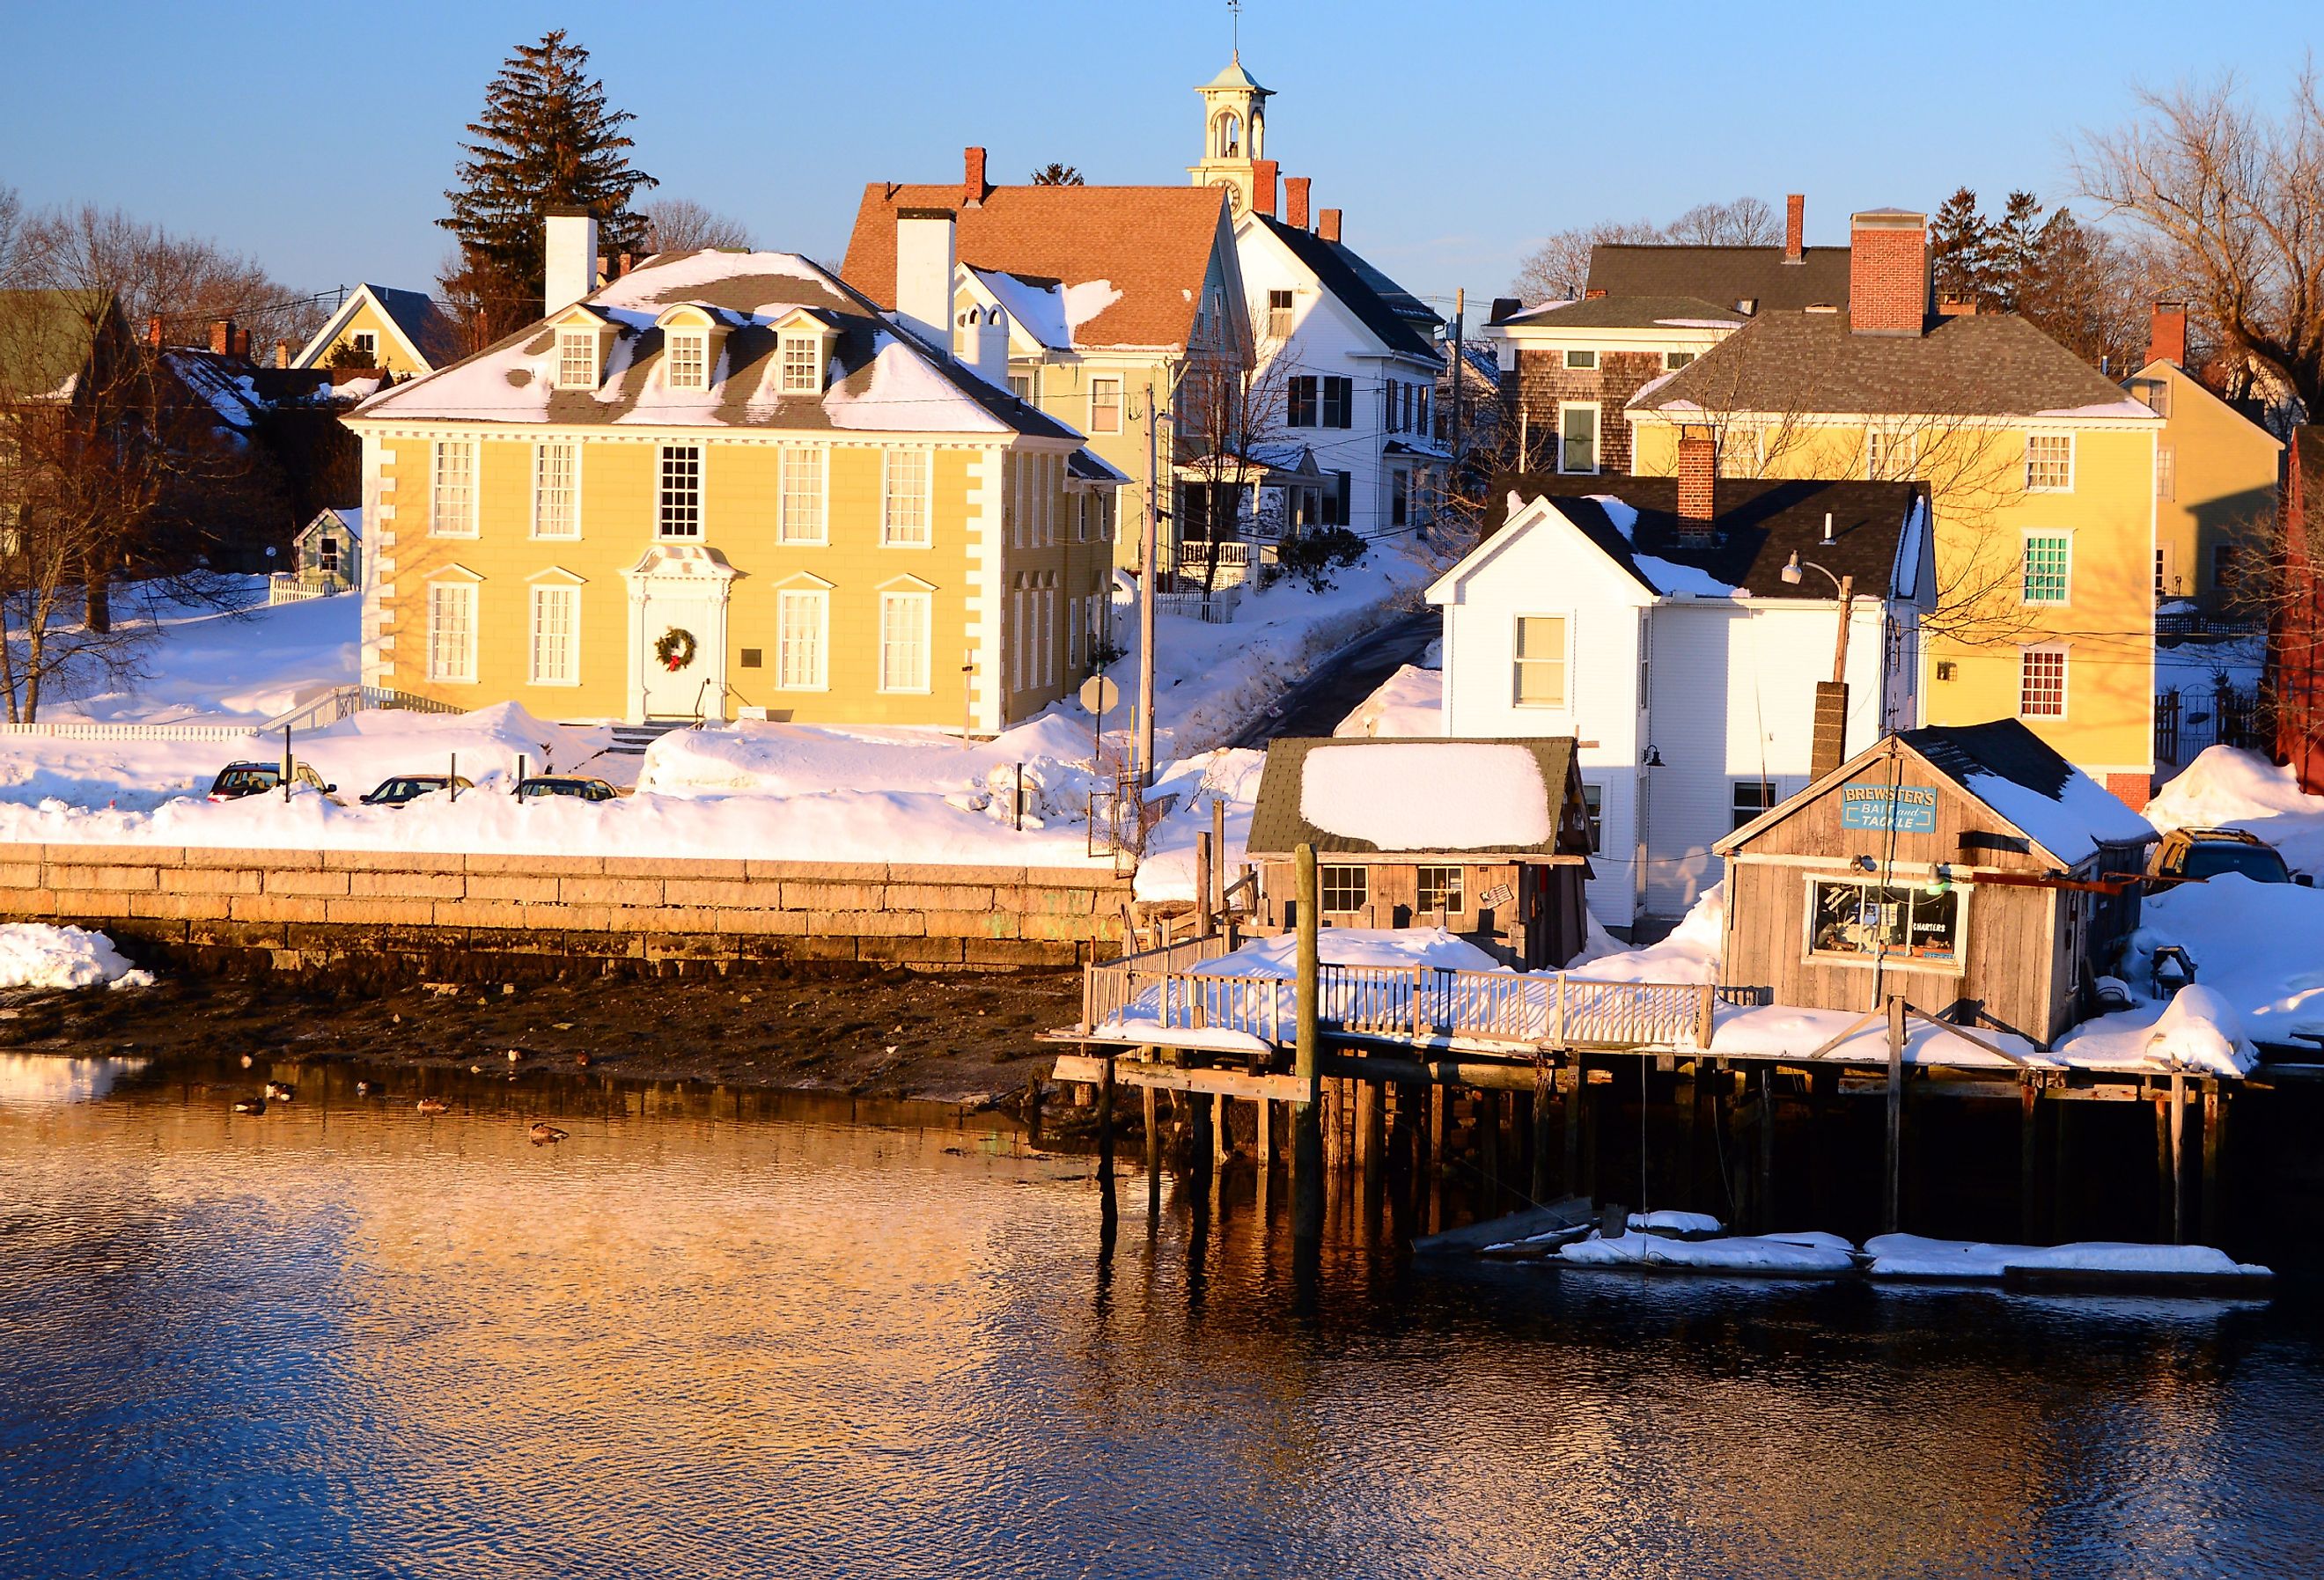 A blanket of snow covers the historic Strawberry Banke, a collection of historic homes in Portsmouth, New Hampshire. Image credit James Kirkikis via Shutterstock